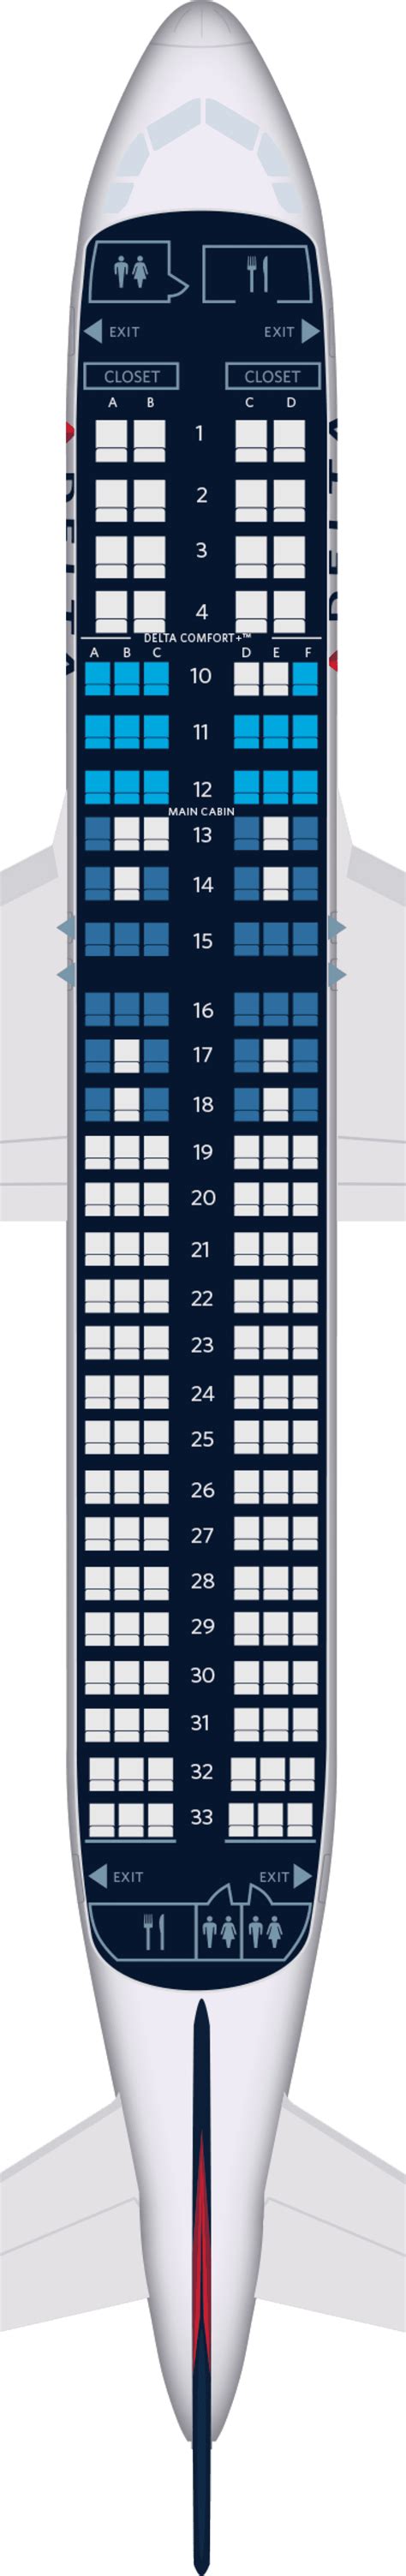 American Airbus A Seat Map